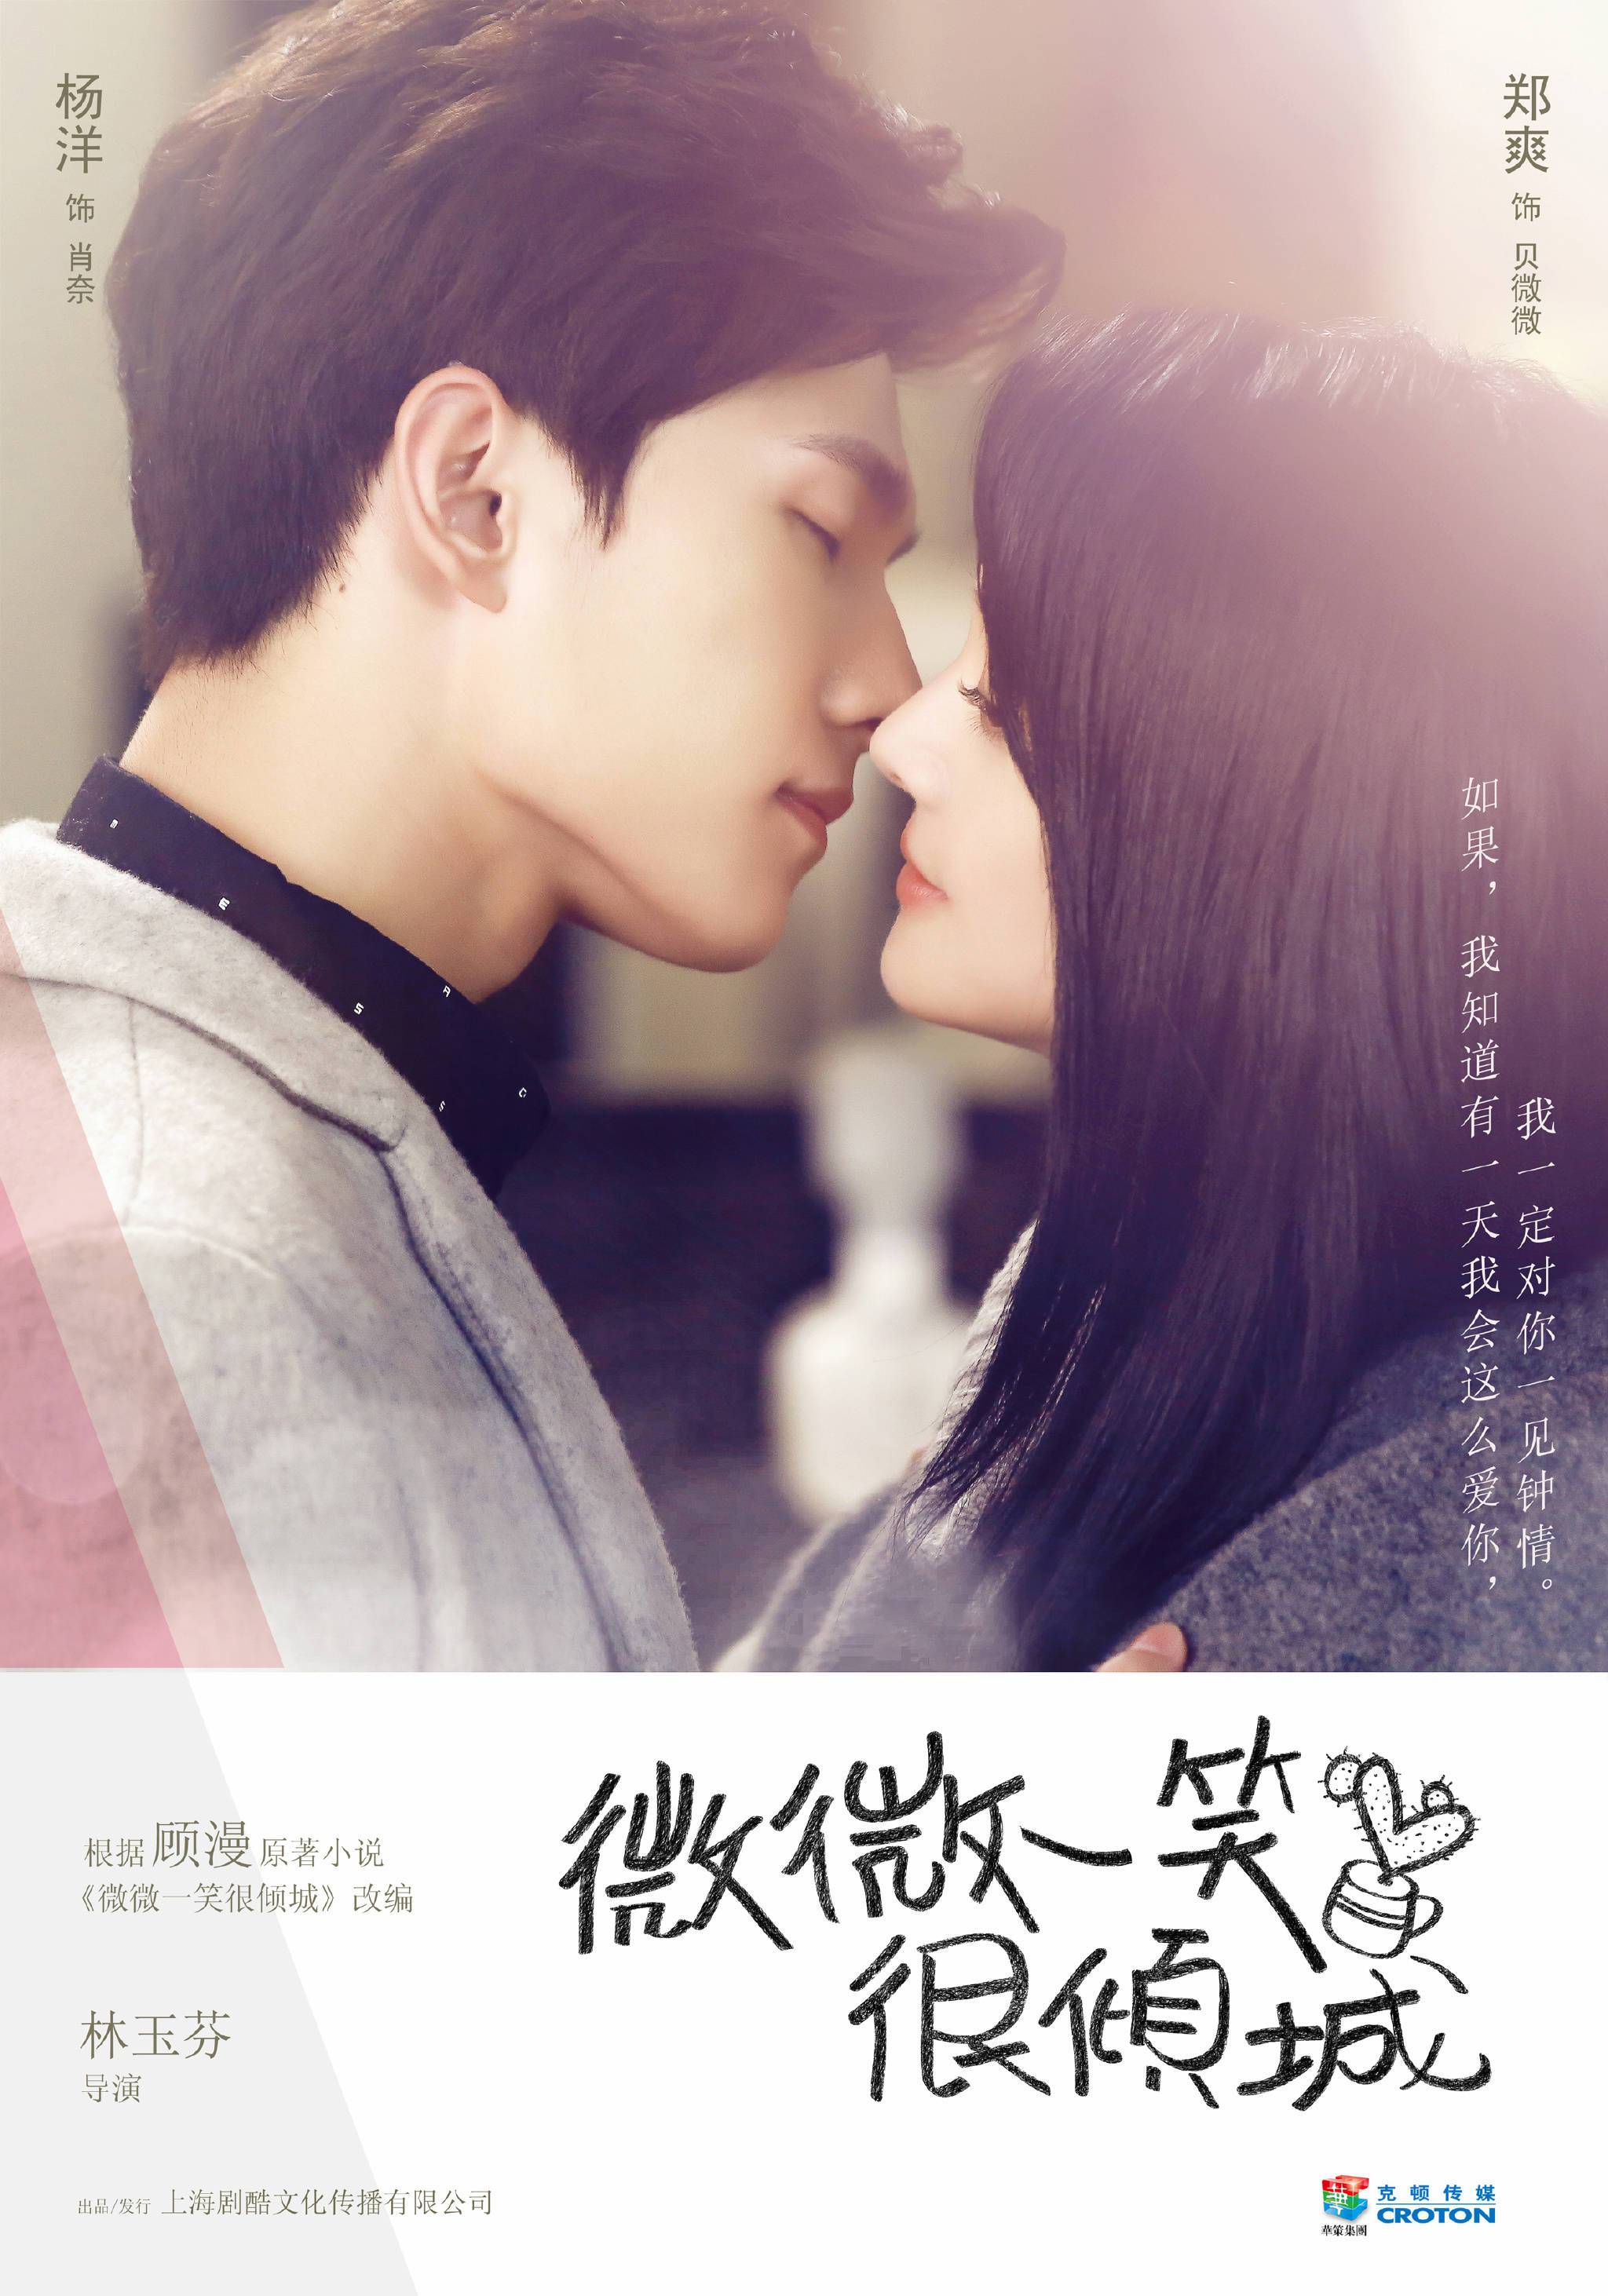 First Impressions: Love O2O (Just One Smile is Very Alluring)